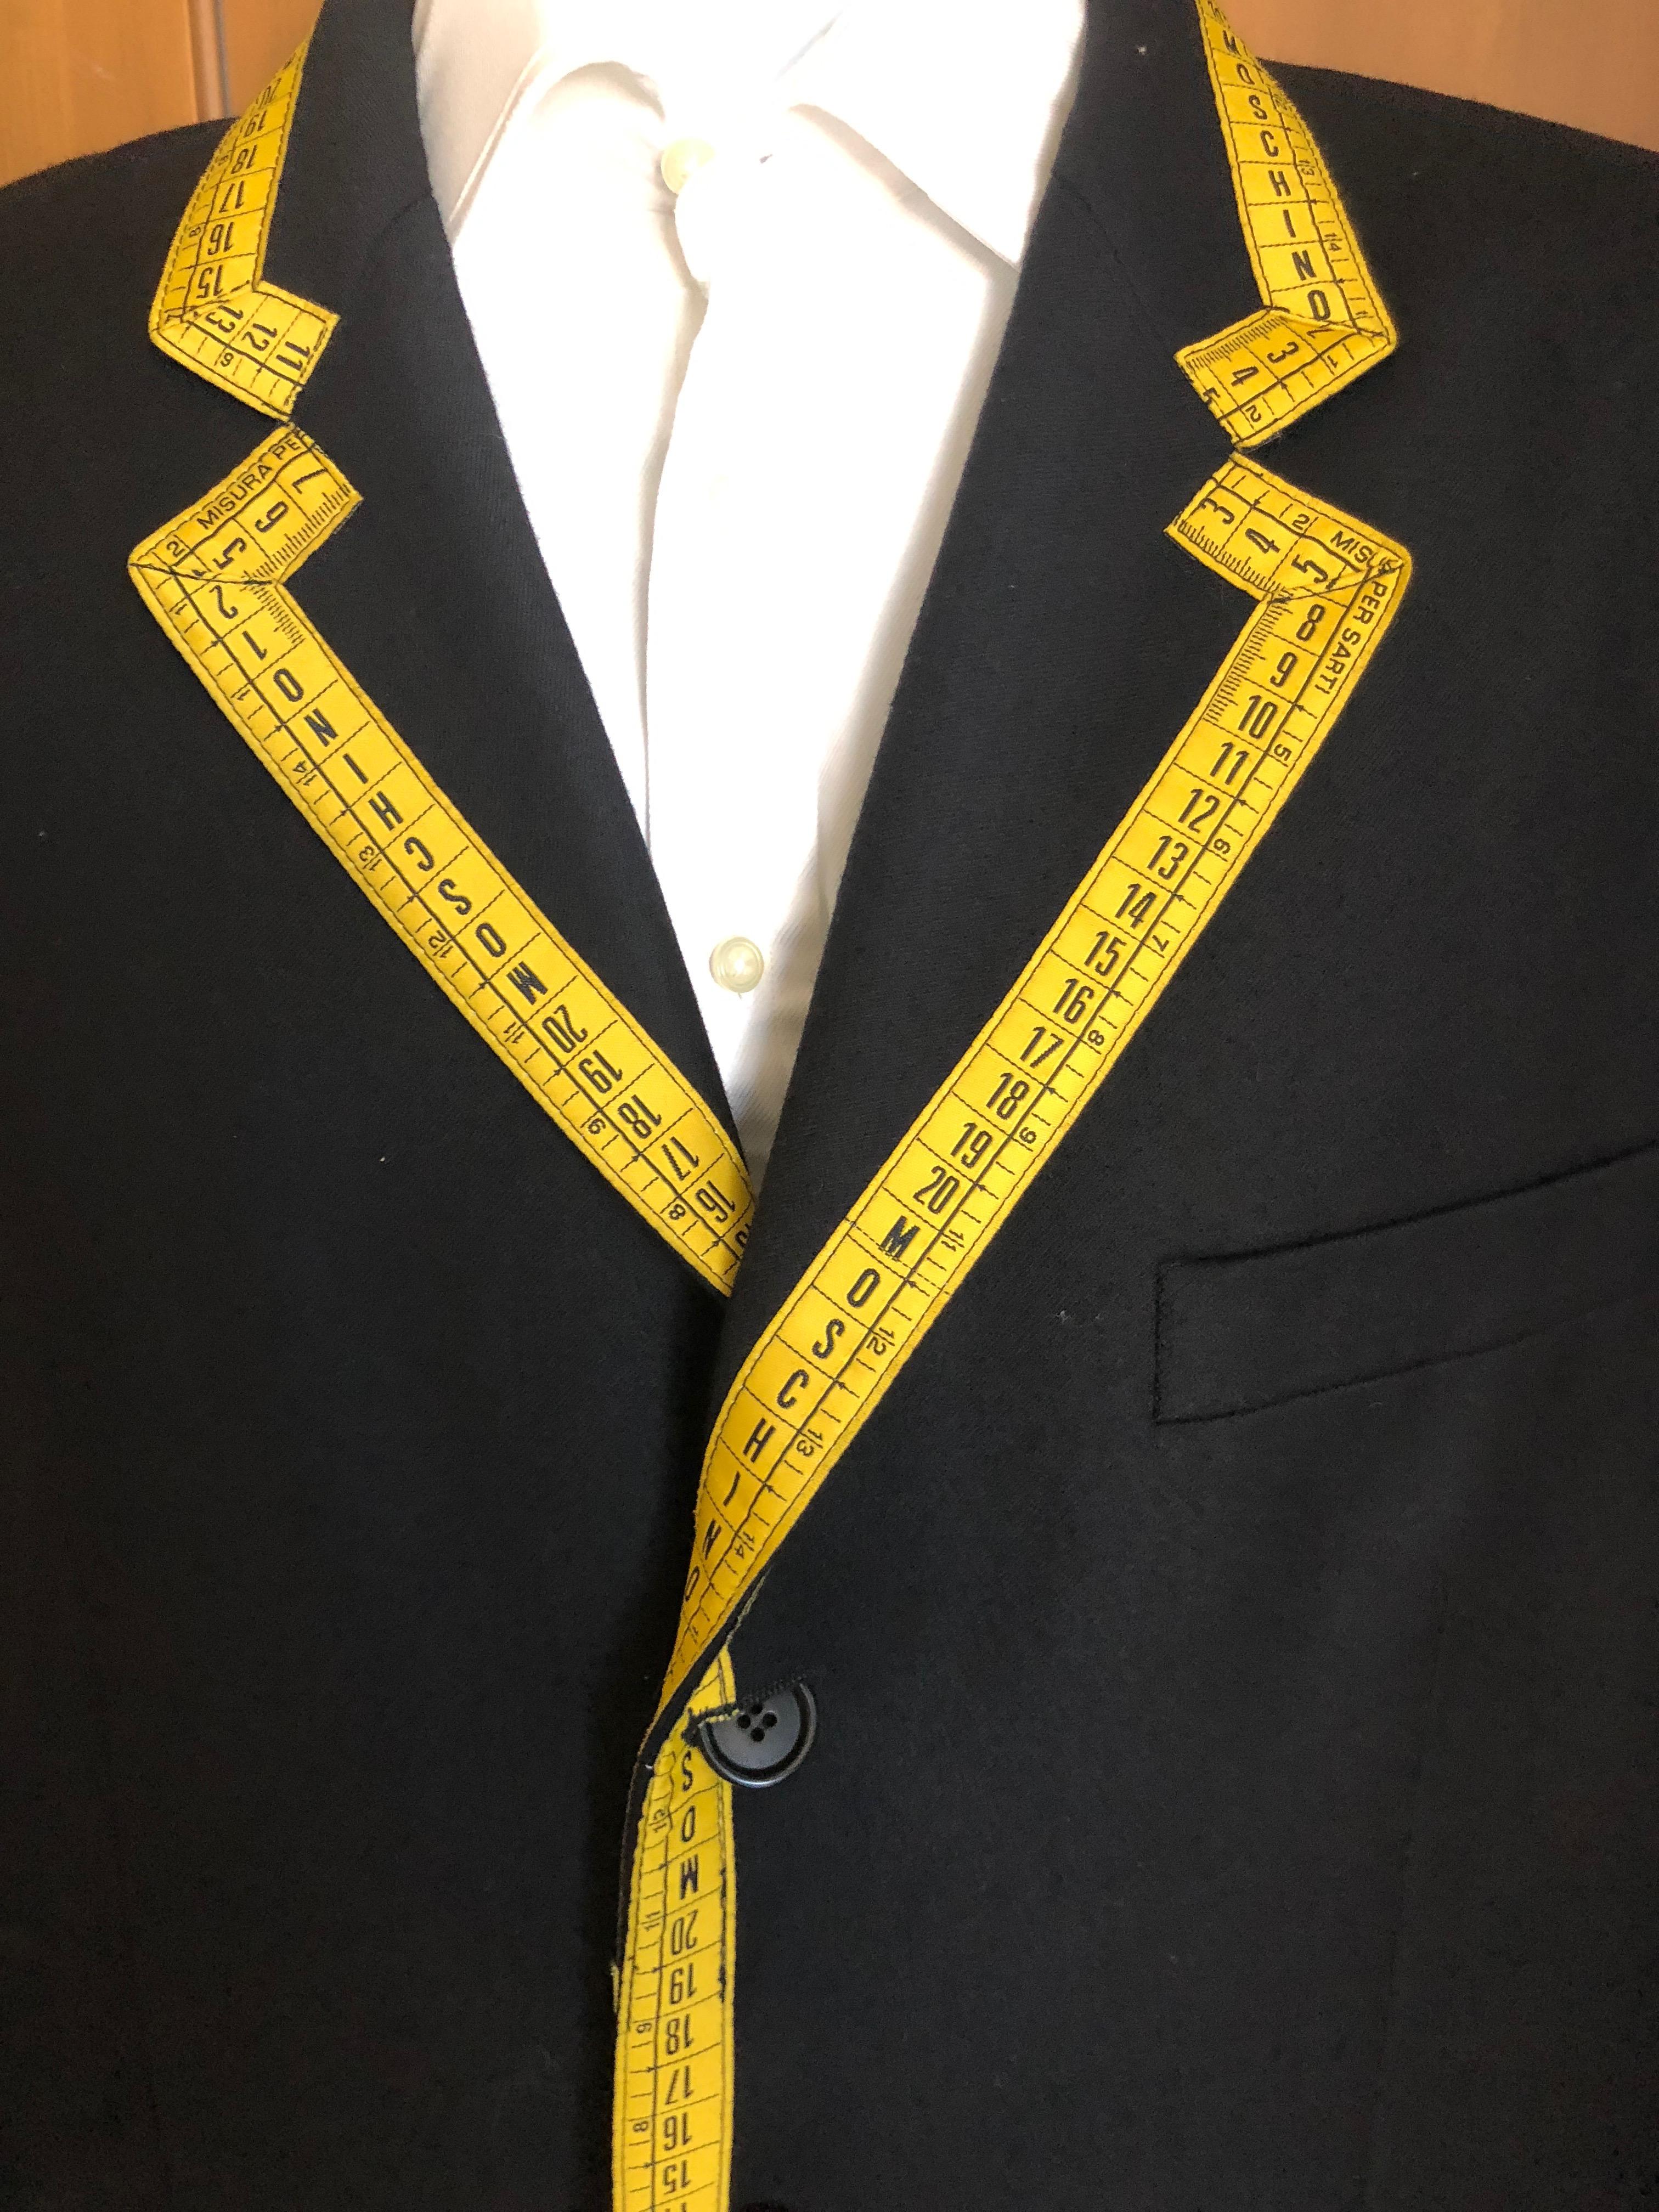 Moschino 1989 Cheap & Chic Iconic Vintage Mens Tape Measure Jacket and Vest For Sale 5